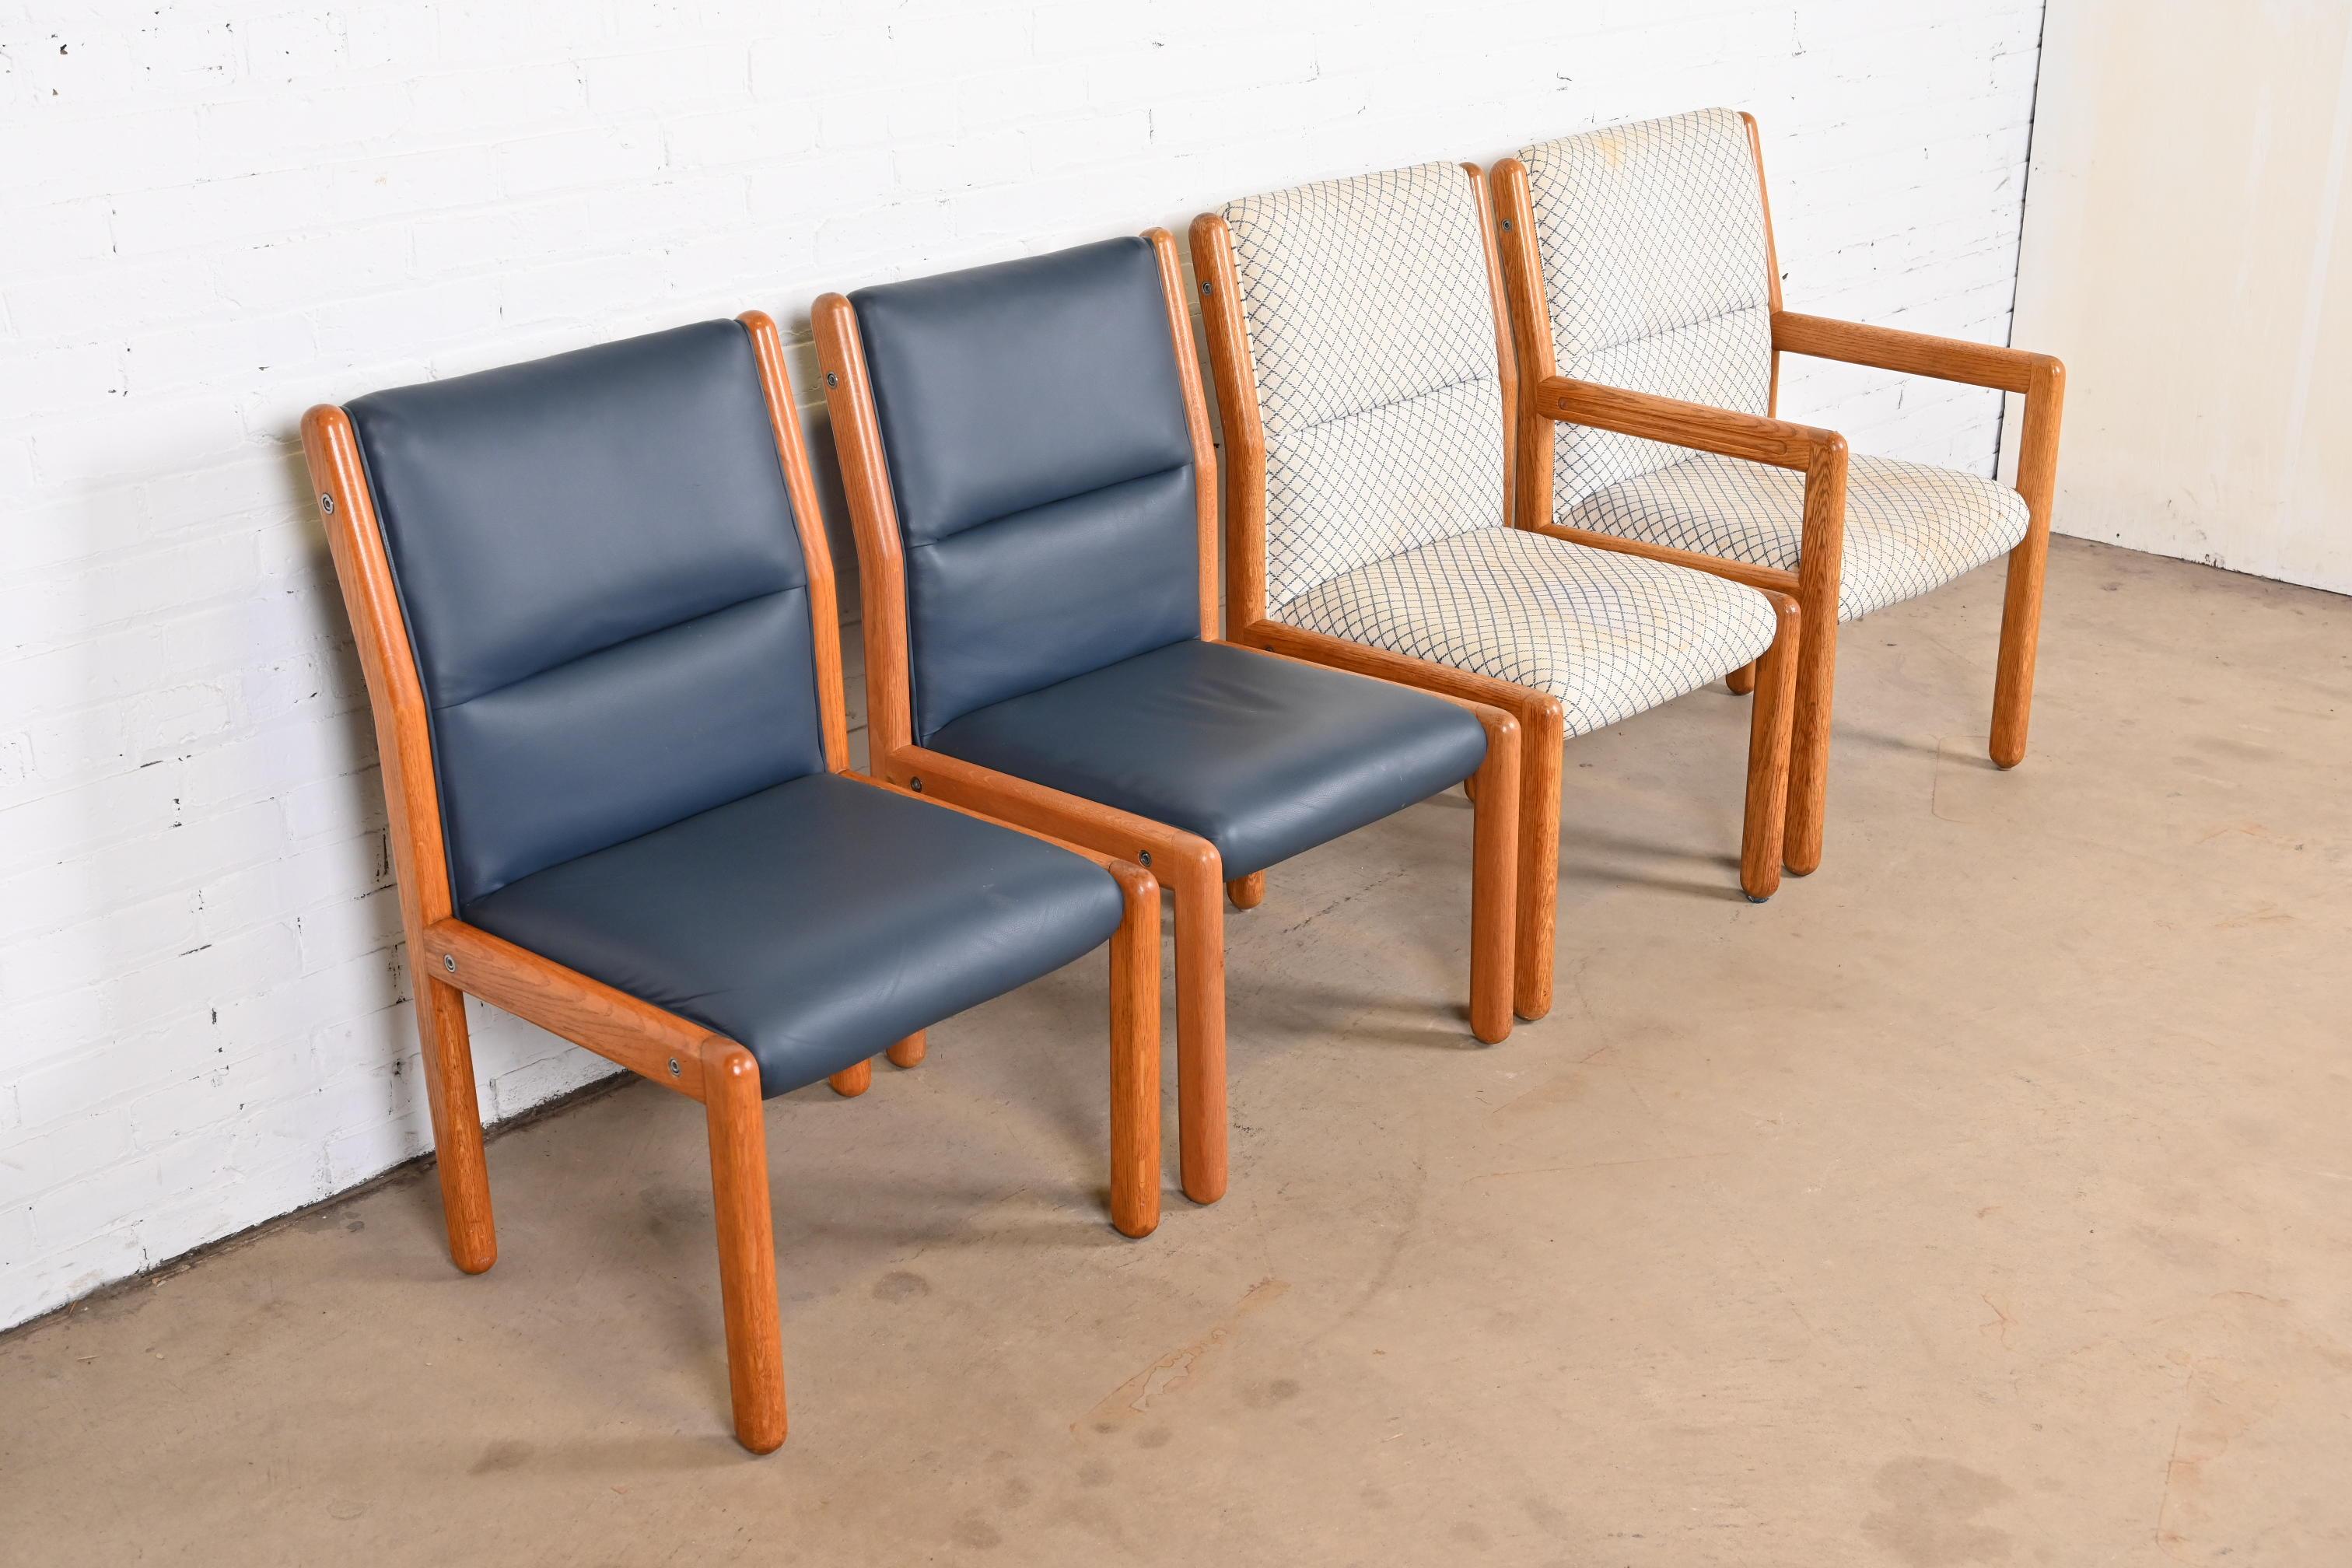 A nice set of four Mid-Century Modern dining chairs

By Dunbar Furniture

USA, 1970s

Solid oak frames, with upholstered seats and backs. Two chairs with high end blue leather upholstery.

Measures:
Side chairs - 21.5